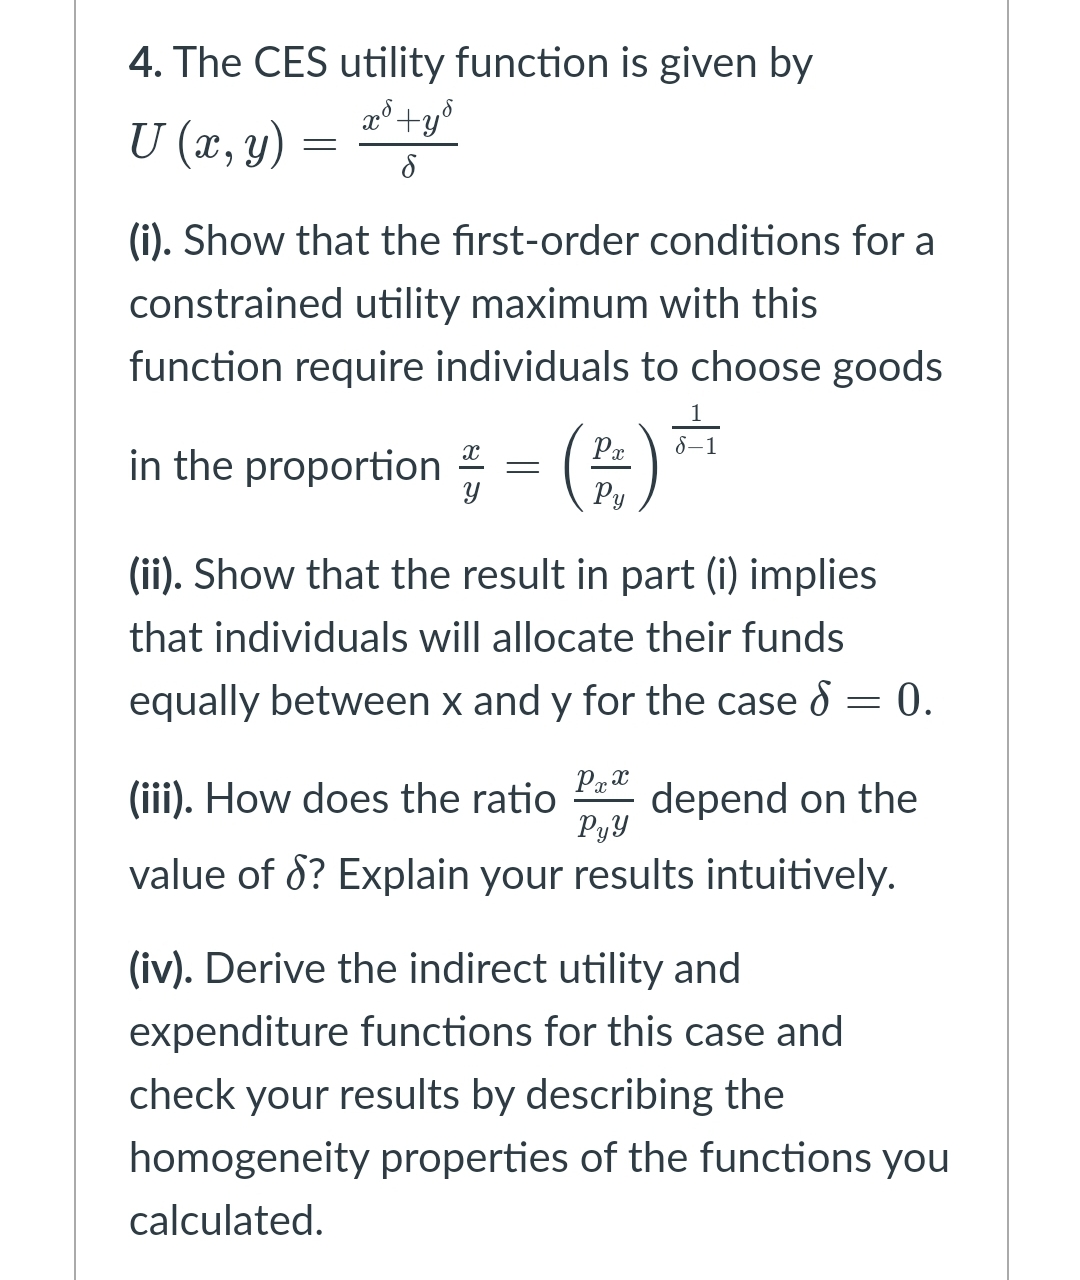 4. The CES utility function is given by
x°+y°
U (x, y)
(i). Show that the first-order conditions for a
constrained utility maximum with this
function require individuals to choose goods
in the proportion =
Pa
8–1
Py
(ii). Show that the result in part (i) implies
that individuals will allocate their funds
equally between x and y for the case 8 = 0.
(iii). How does the ratio
depend on the
PyY
value of 8? Explain your results intuitively.
(iv). Derive the indirect utility and
expenditure functions for this case and
check your results by describing the
homogeneity properties of the functions you
calculated.
